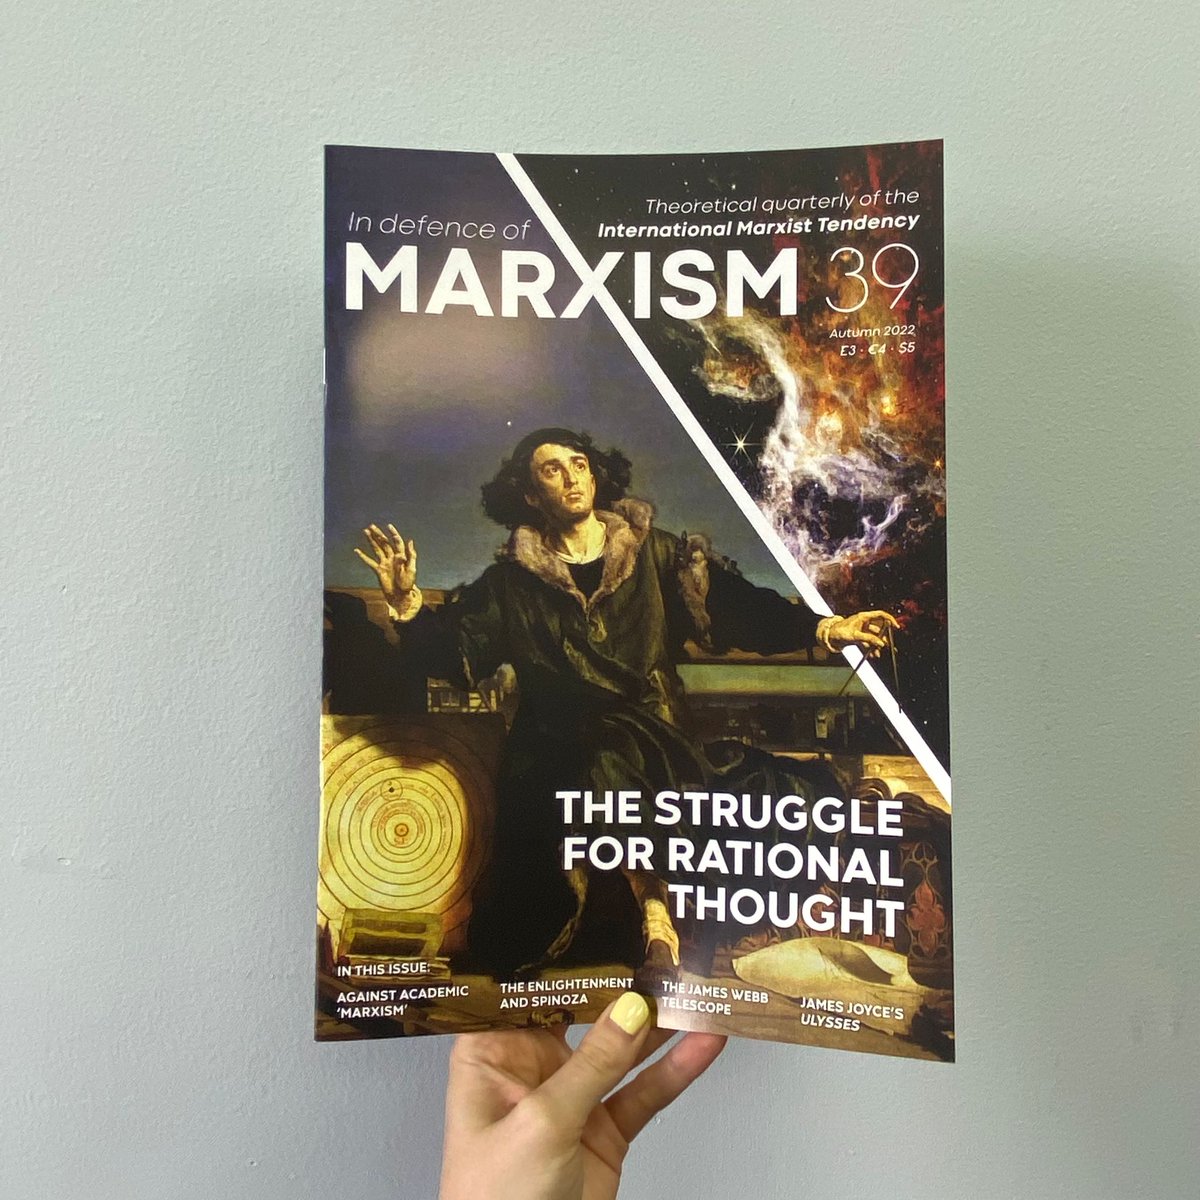 OUT NOW! In Defence of Marxism (#39) featuring four articles around the theme of the Enlightenment and the struggle for rational thought. Get your copy now at marxist.com/magazine 📖🚩